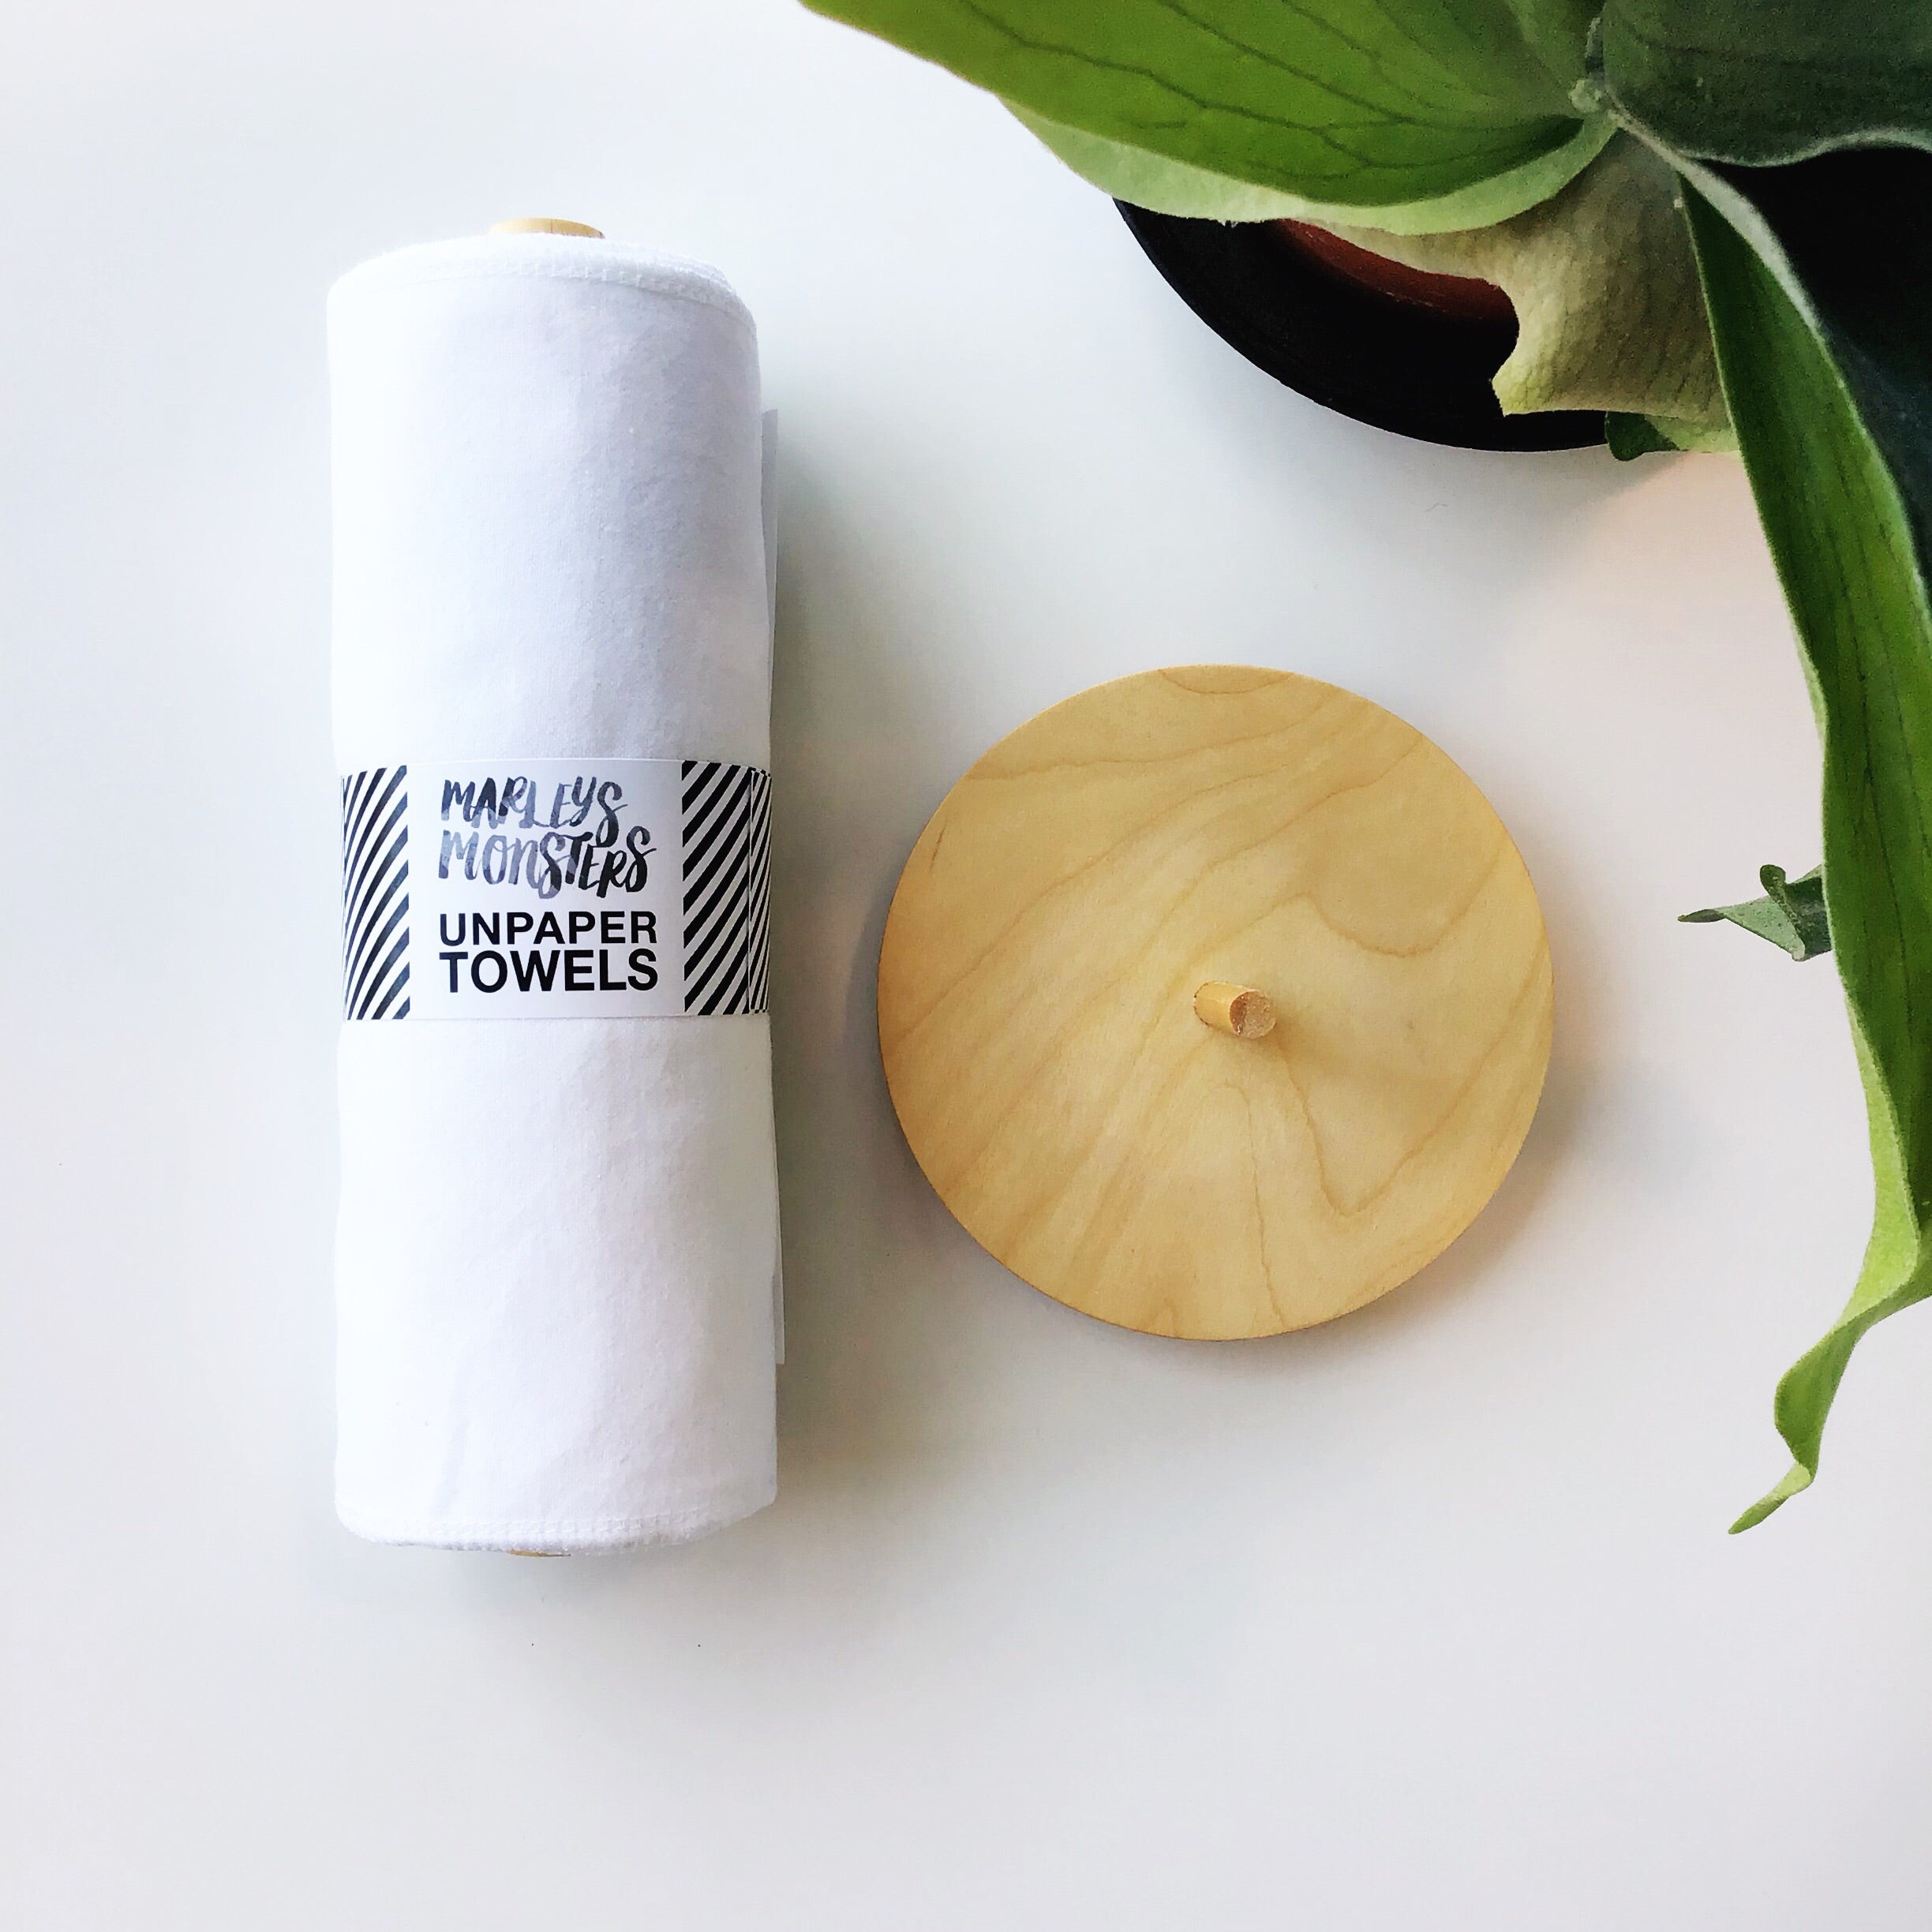 Marley's Monsters UNpaper® Towels + Wooden Holder shows white cotton flannel reusable paper towels rolled like paper towel